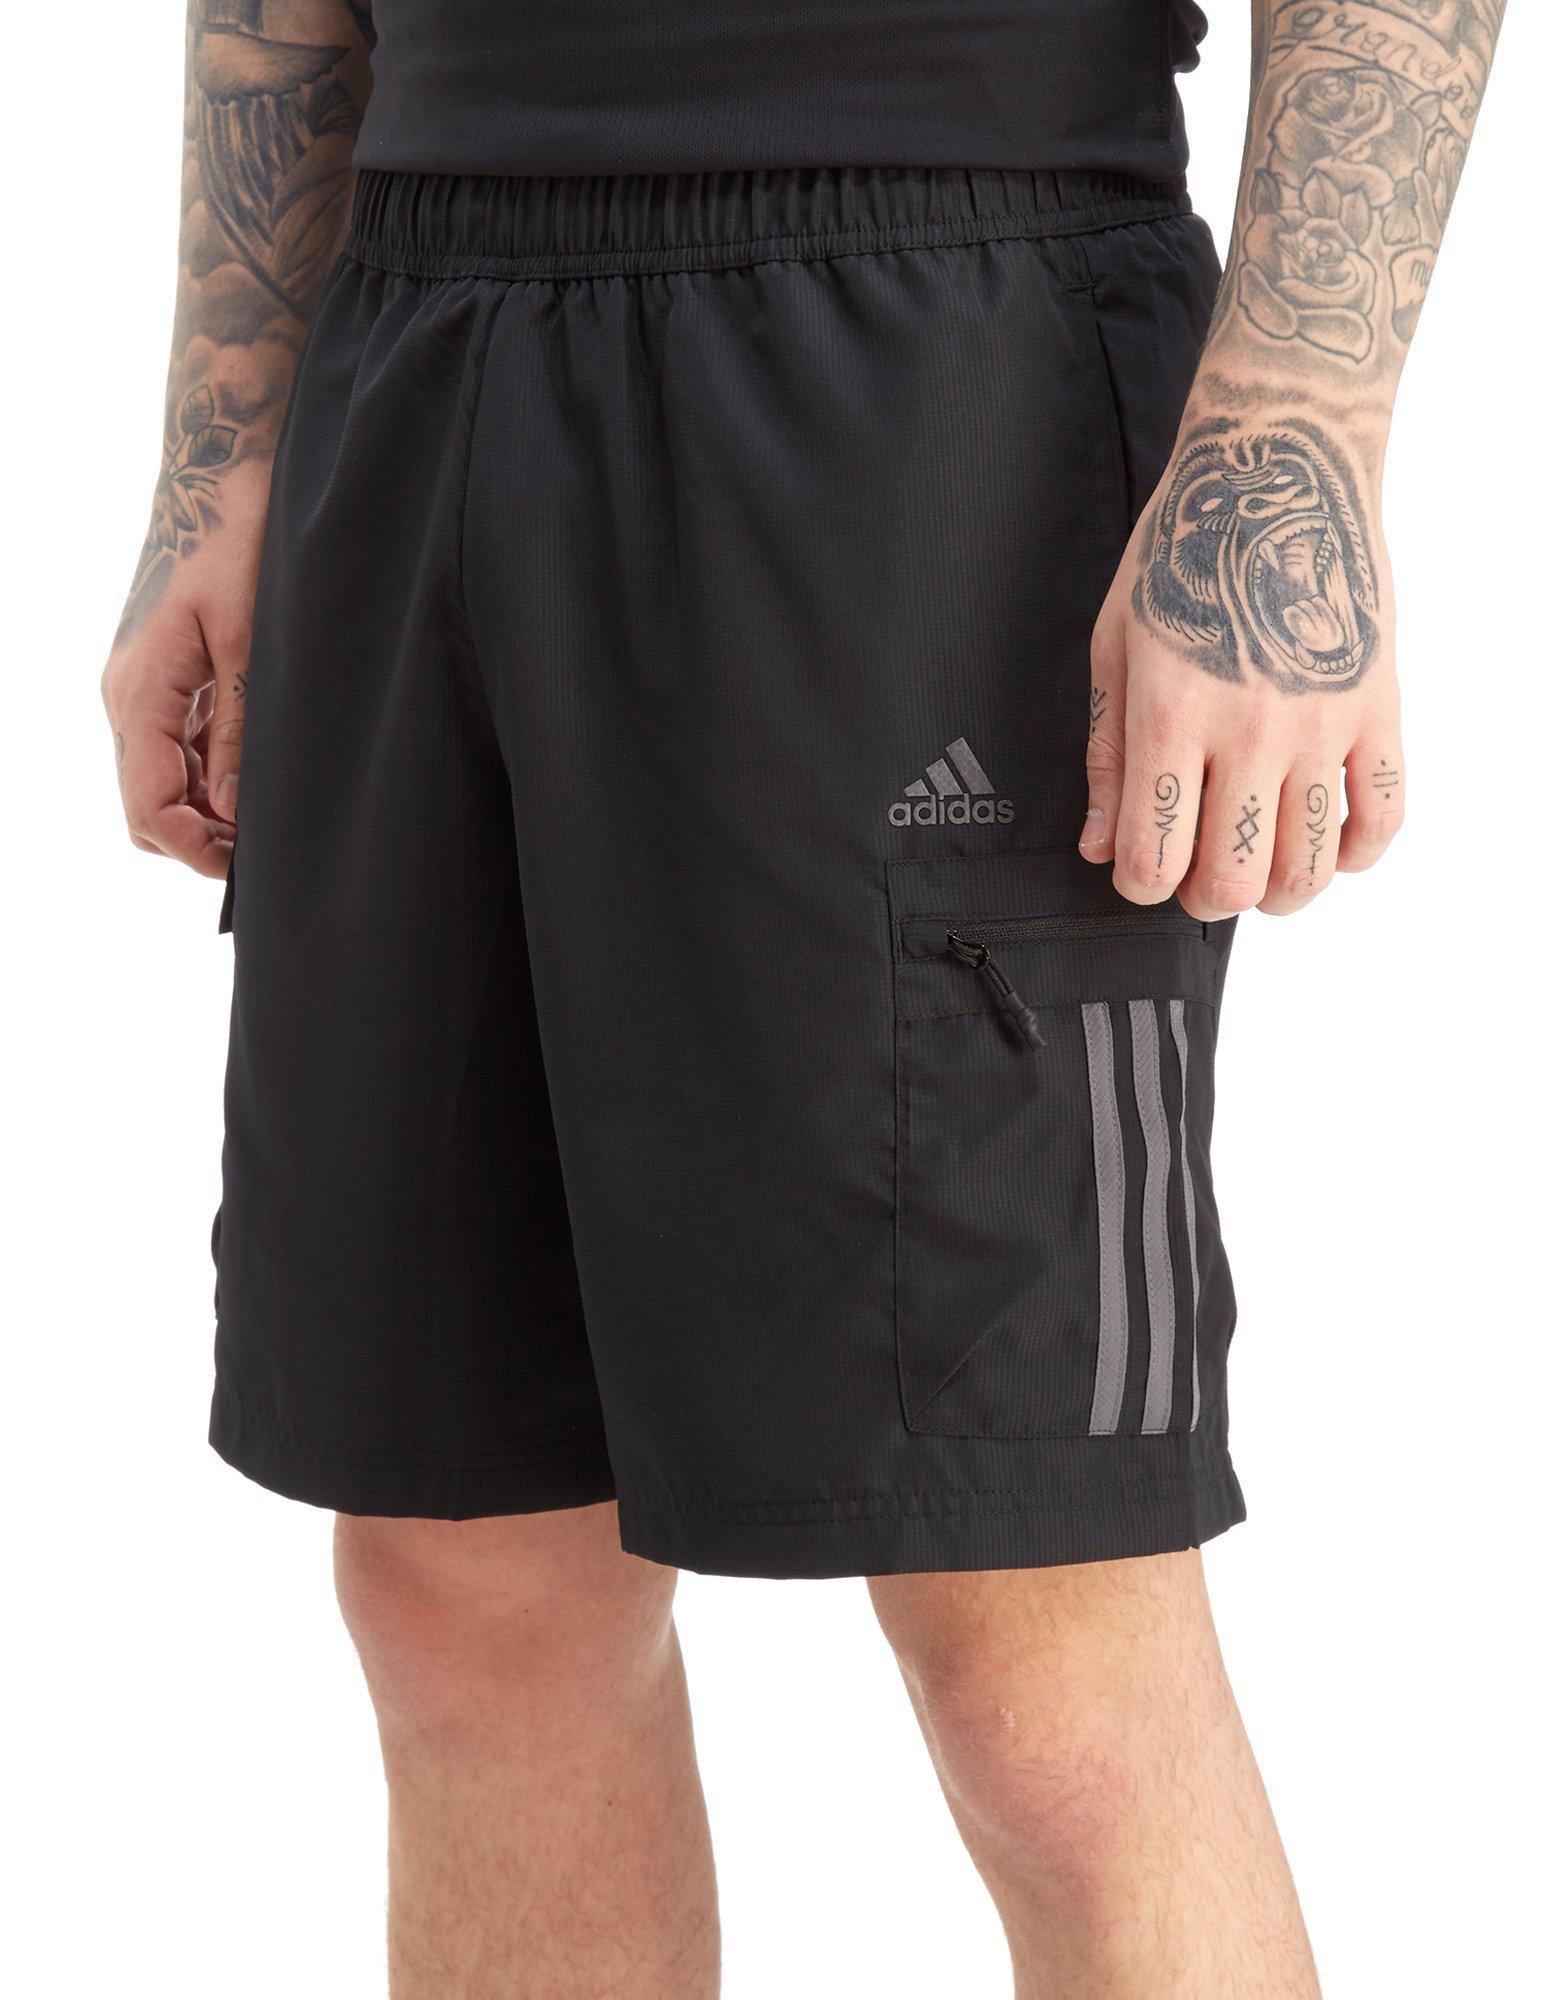 adidas cargo shorts for men,www.autoconnective.in